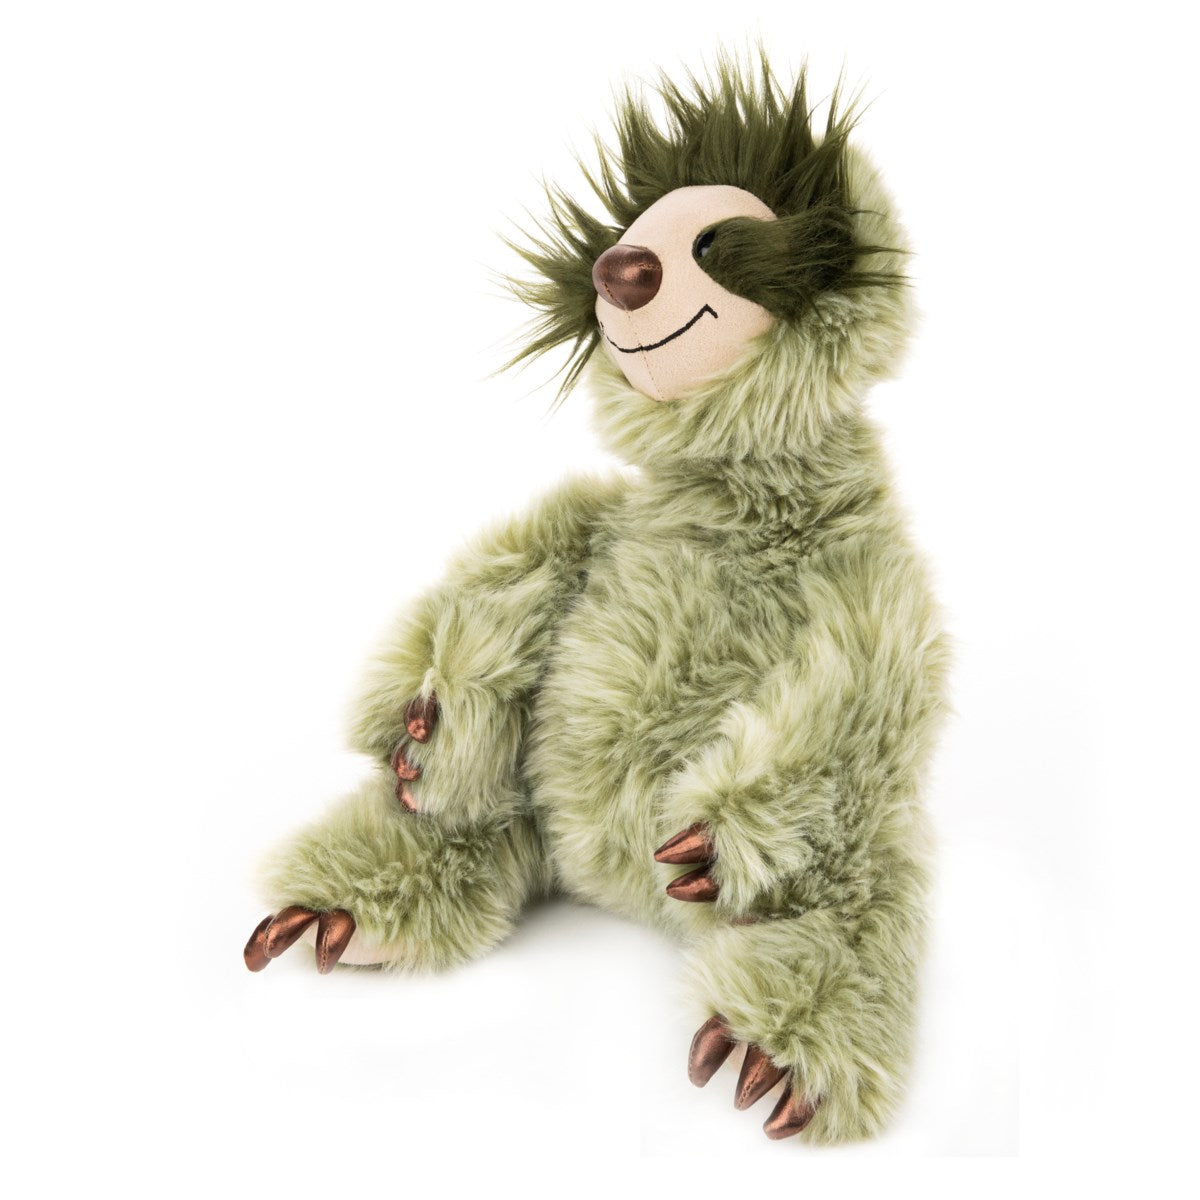 FAB PALS - 11.5" ROSWELL SLOTH